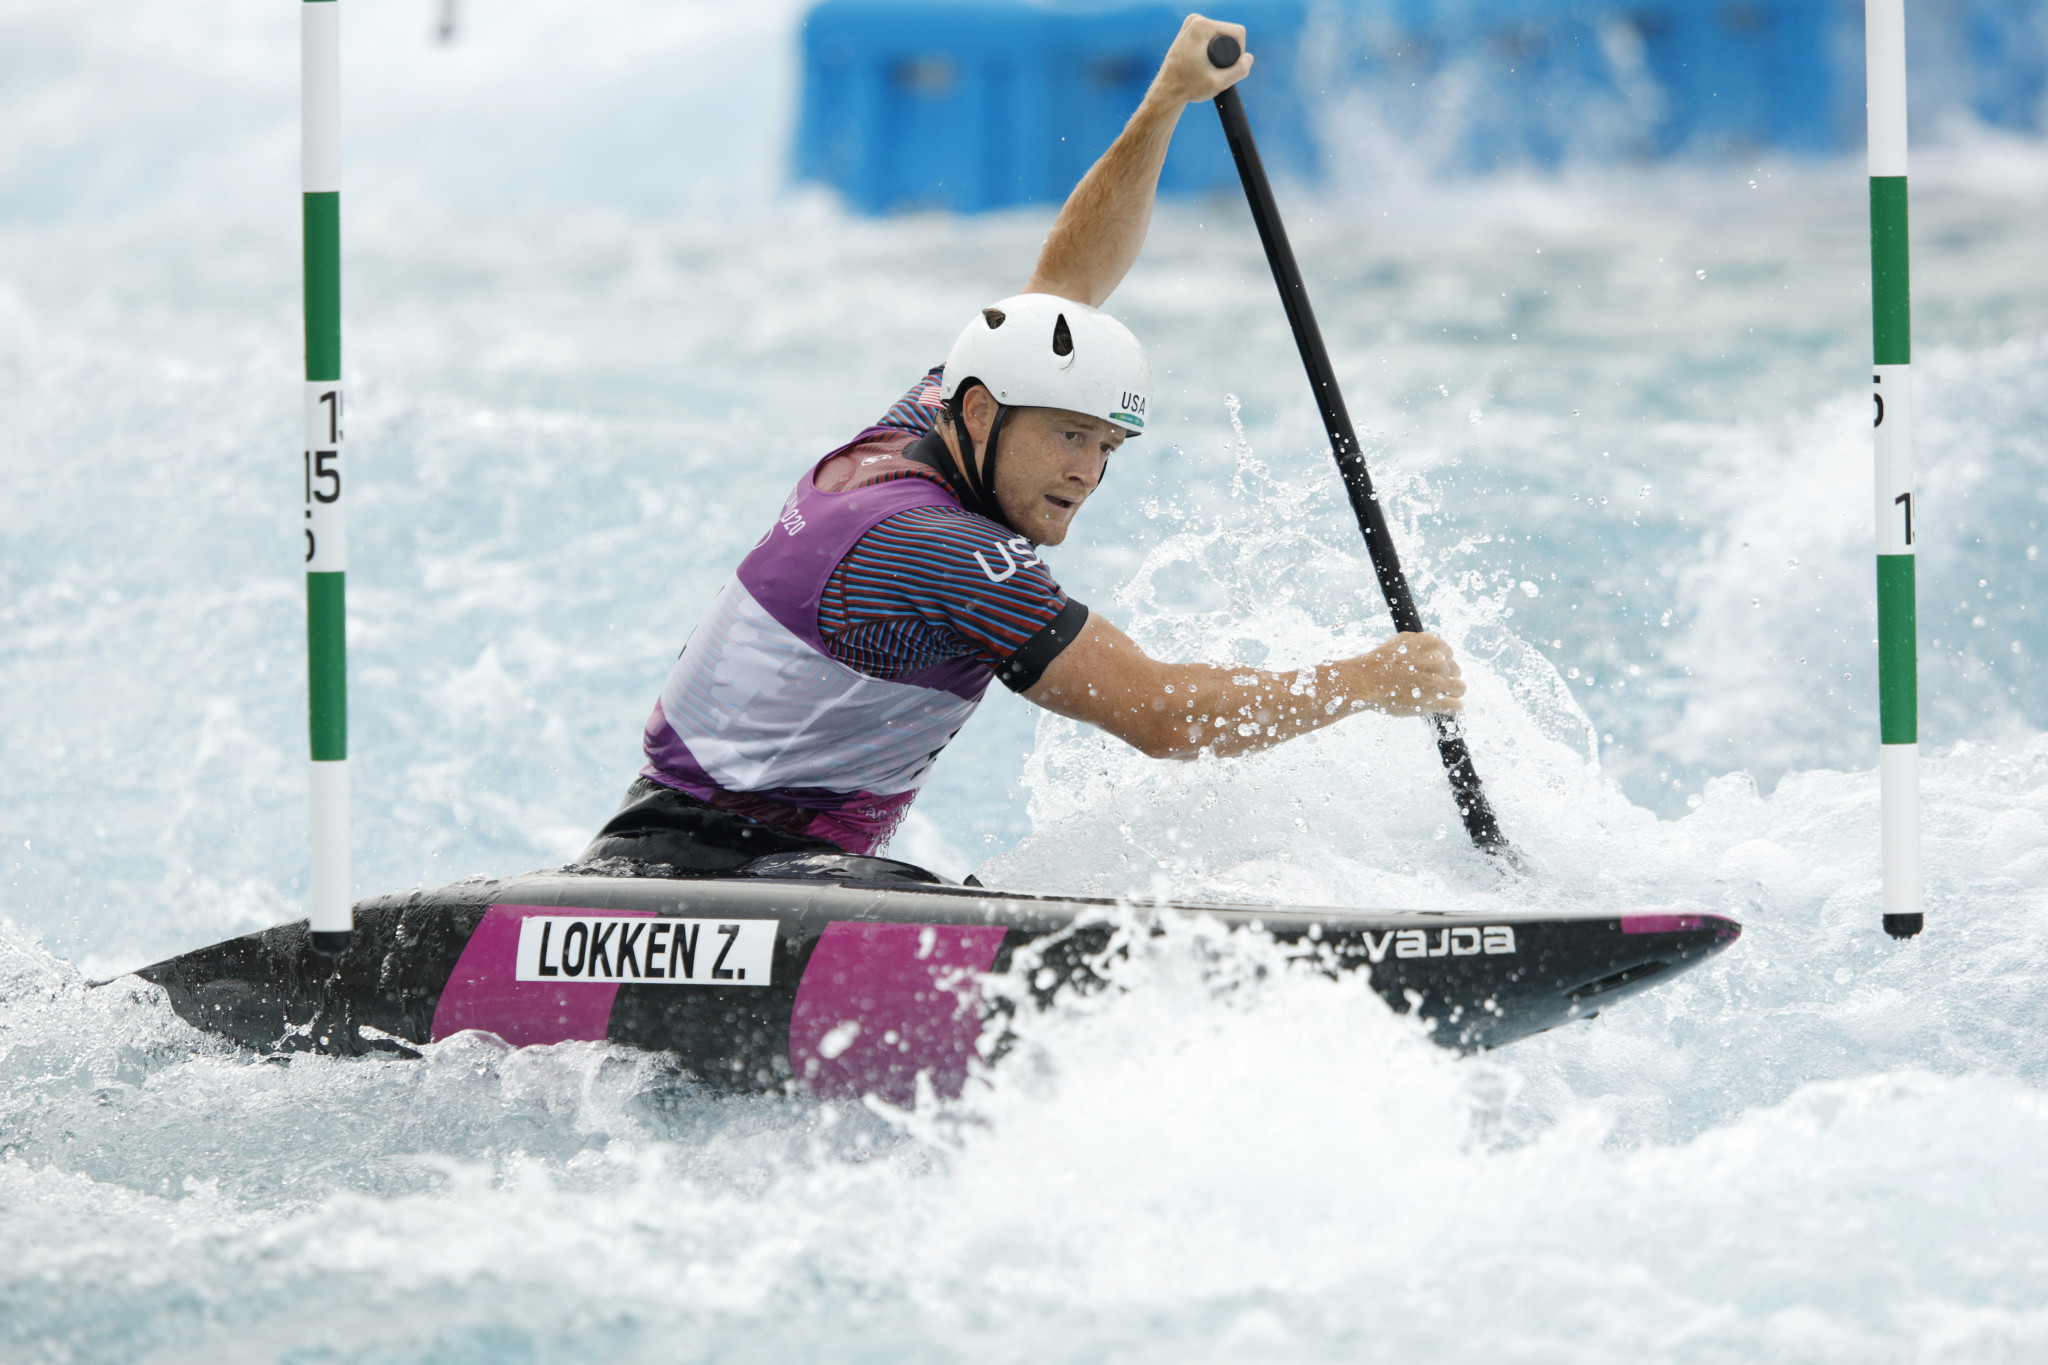 Zachary Lokken of the US won the men's canoe heats on the final day of the Pan American Canoe Slalom Championships in Oklahoma City ©Getty Images